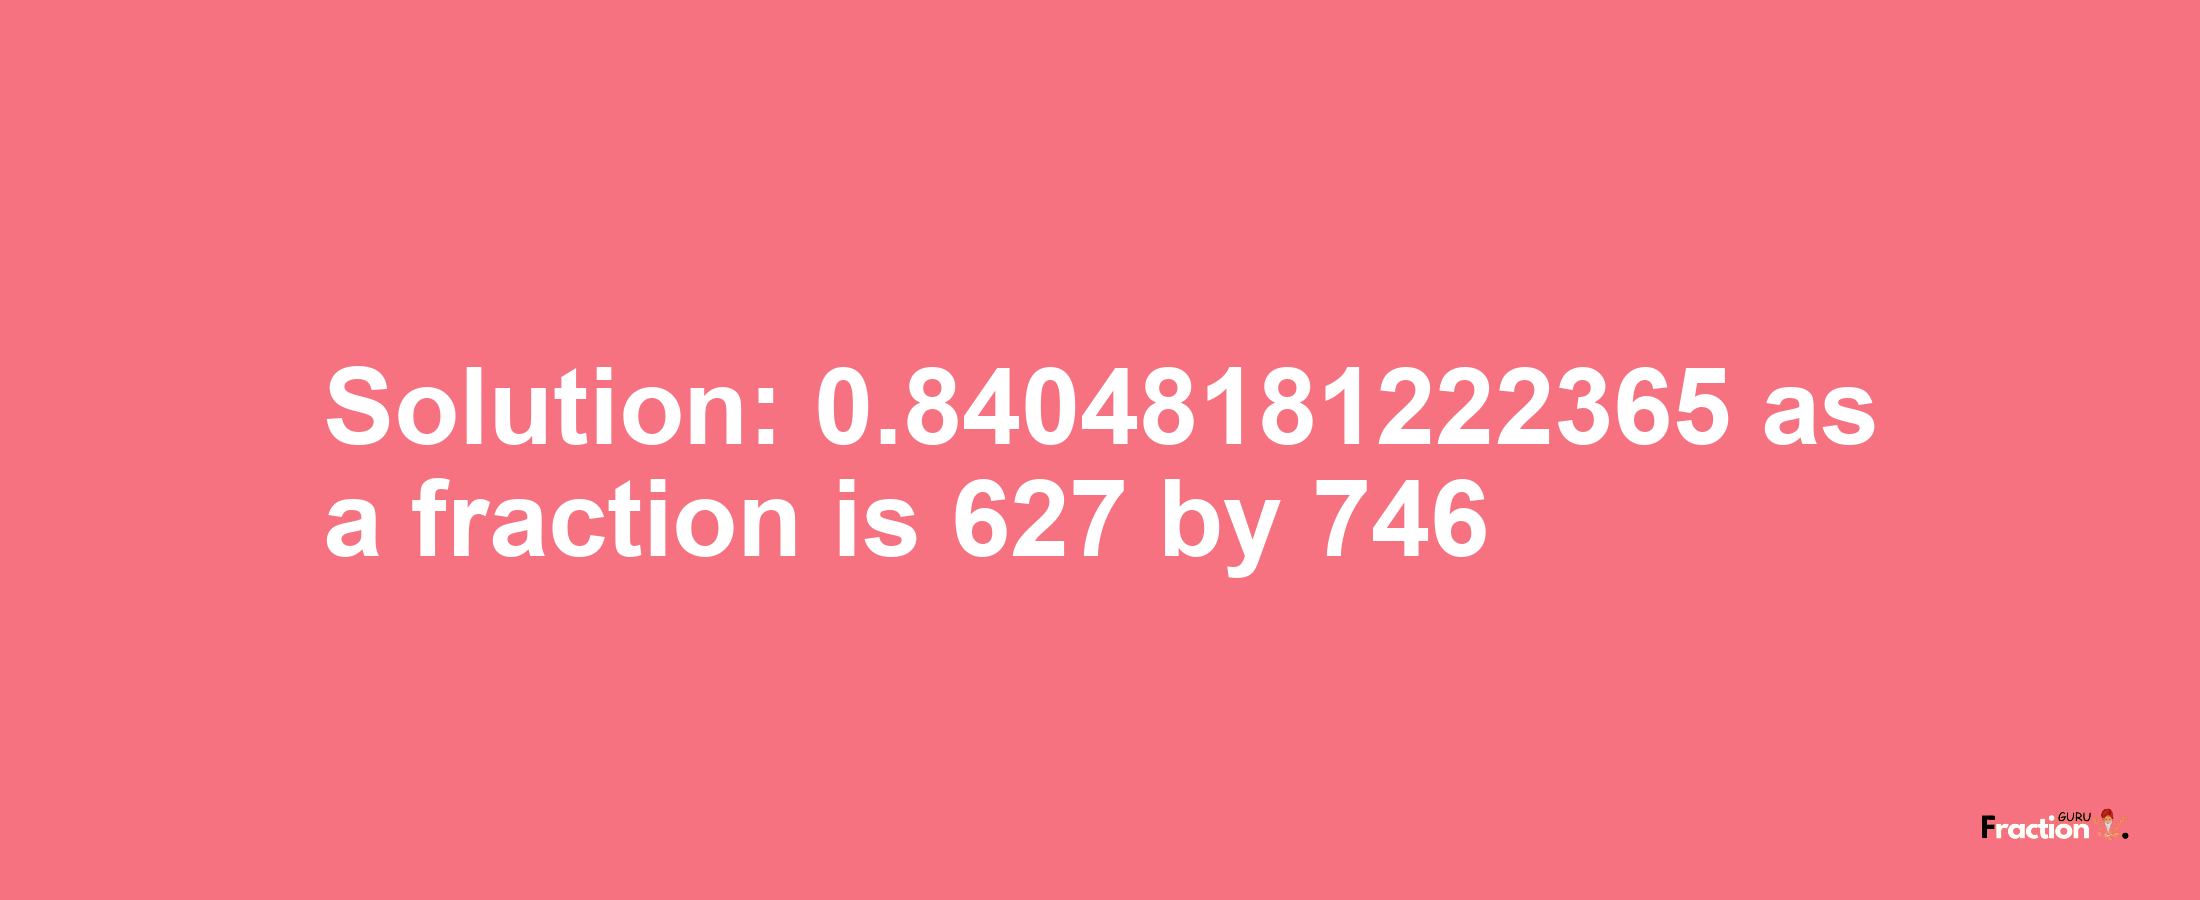 Solution:0.84048181222365 as a fraction is 627/746